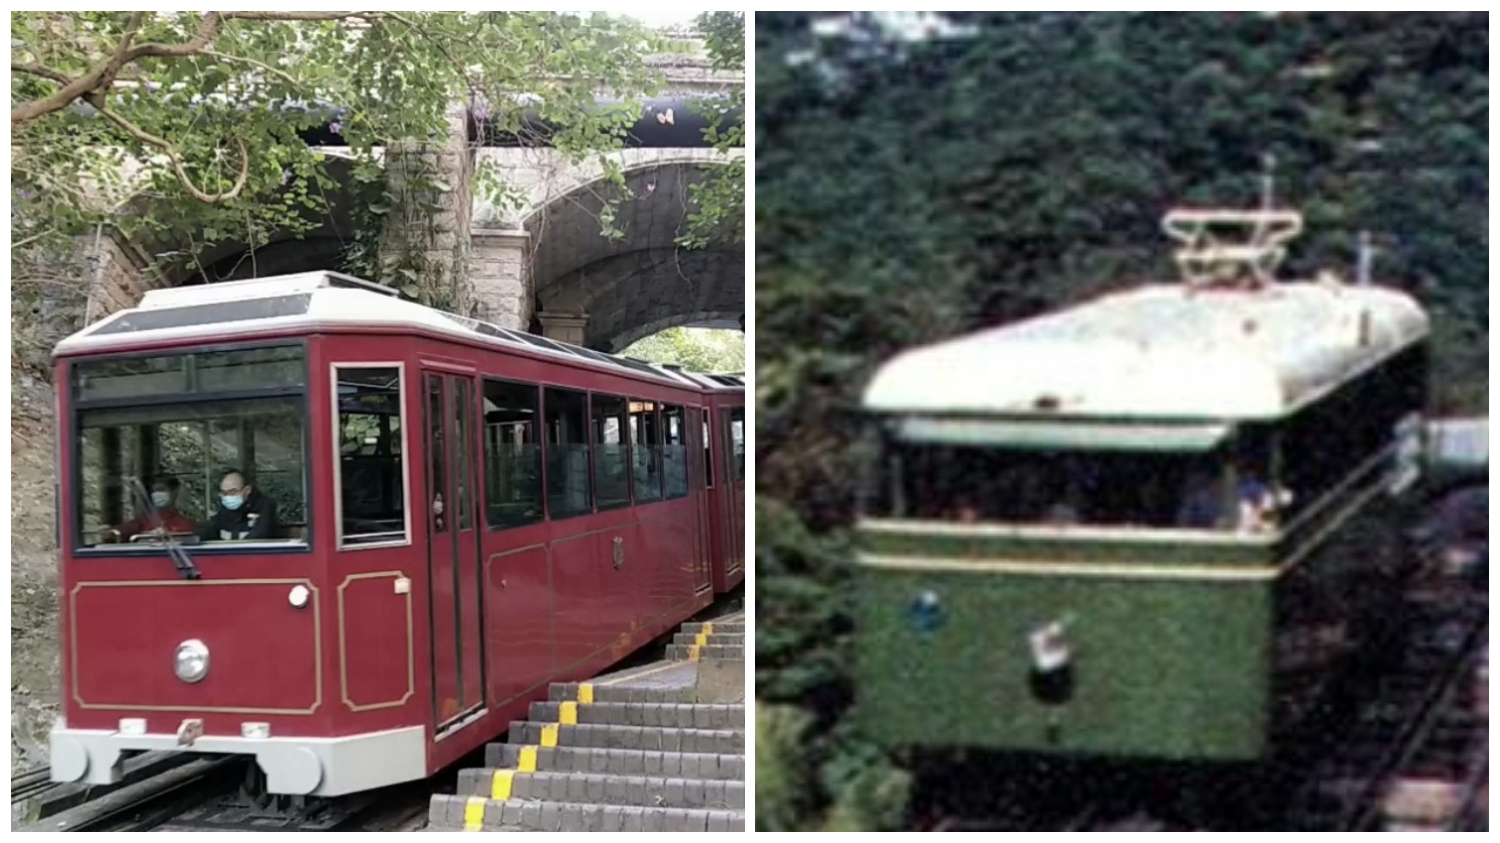 Differences between the past and present Hong Kong Peak Tram